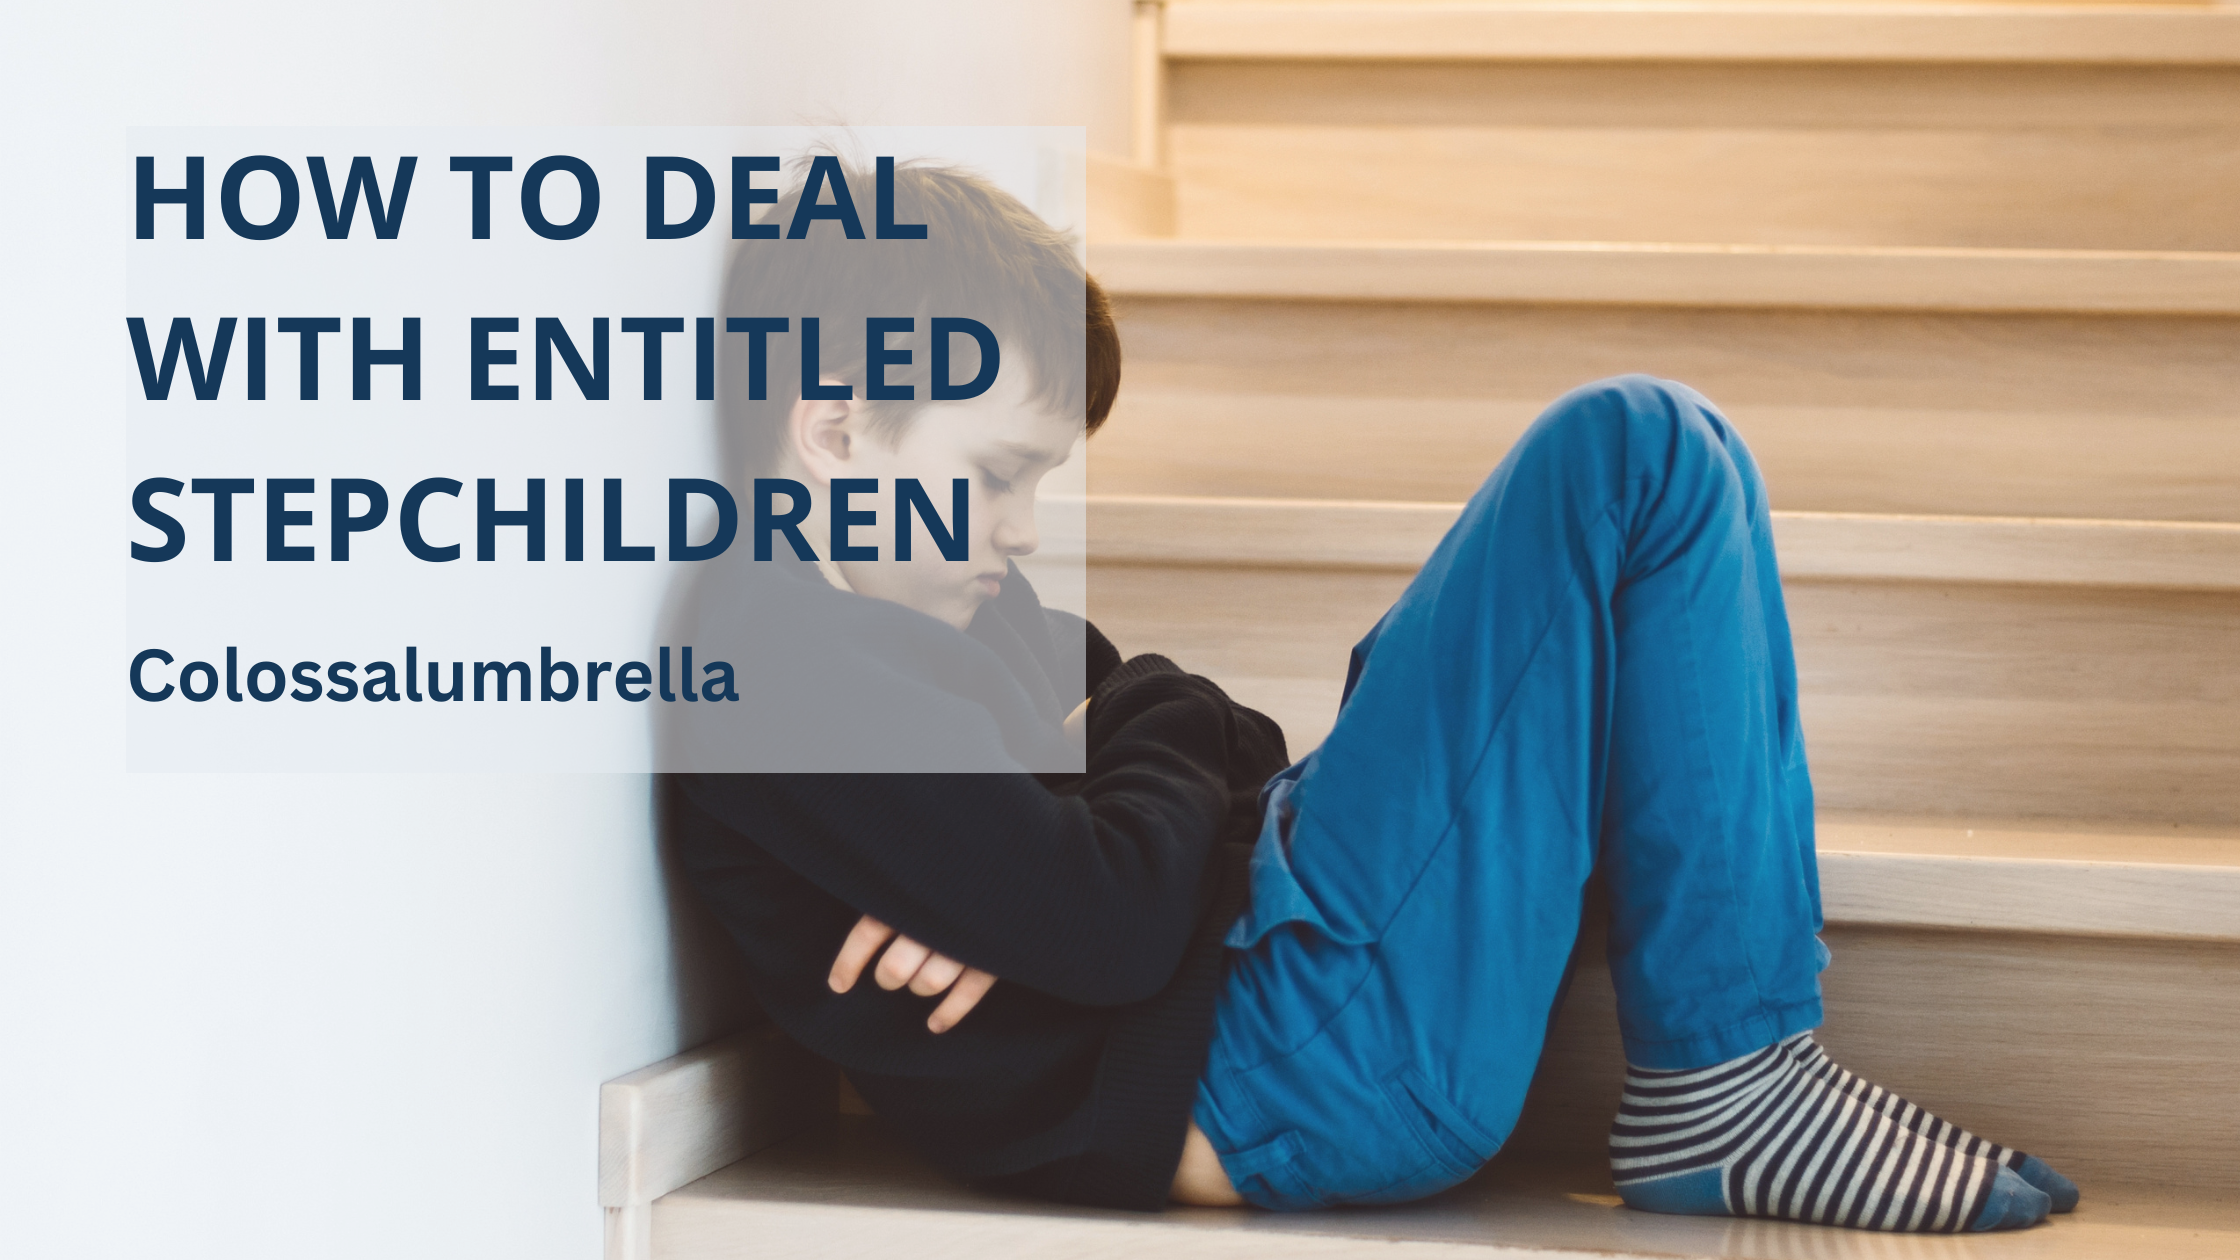 15 Simple ways on how to deal with entitled stepchildren